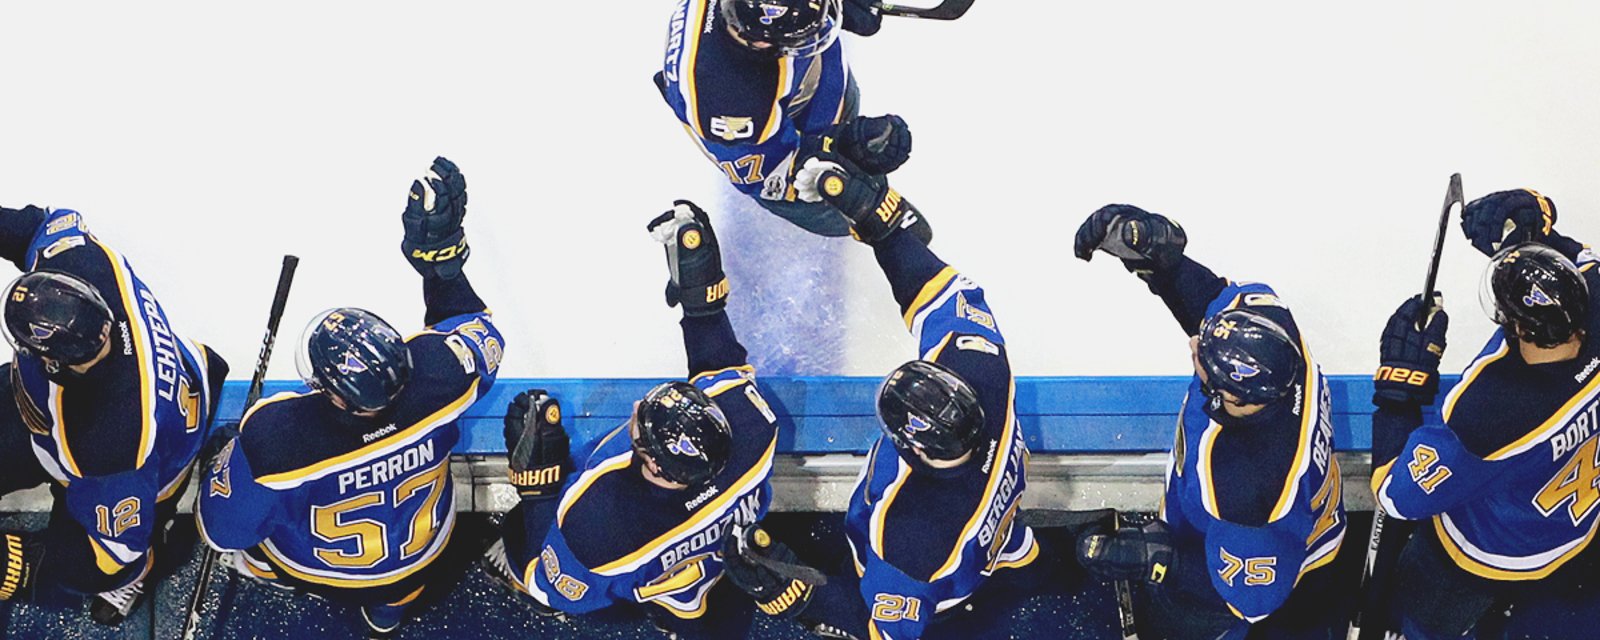 St. Louis Blues GM sends HEAVY JABB to his roster following elimination.